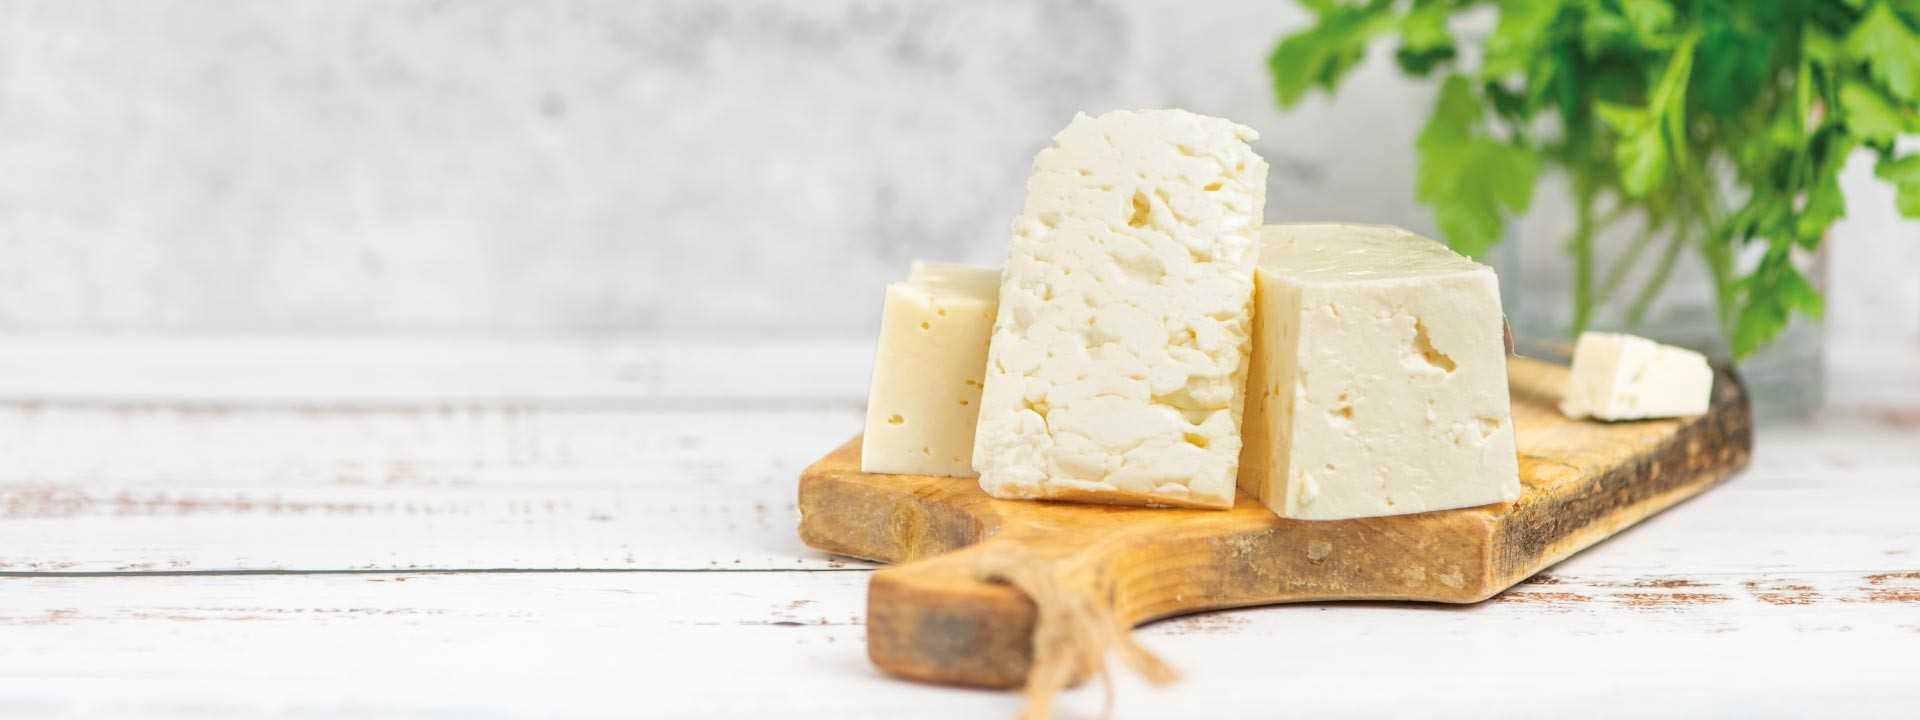 <h2>Tuscan Cheeses</h2>
<p>Discover our selection of artisanal cheeses produced in Tuscany</p>